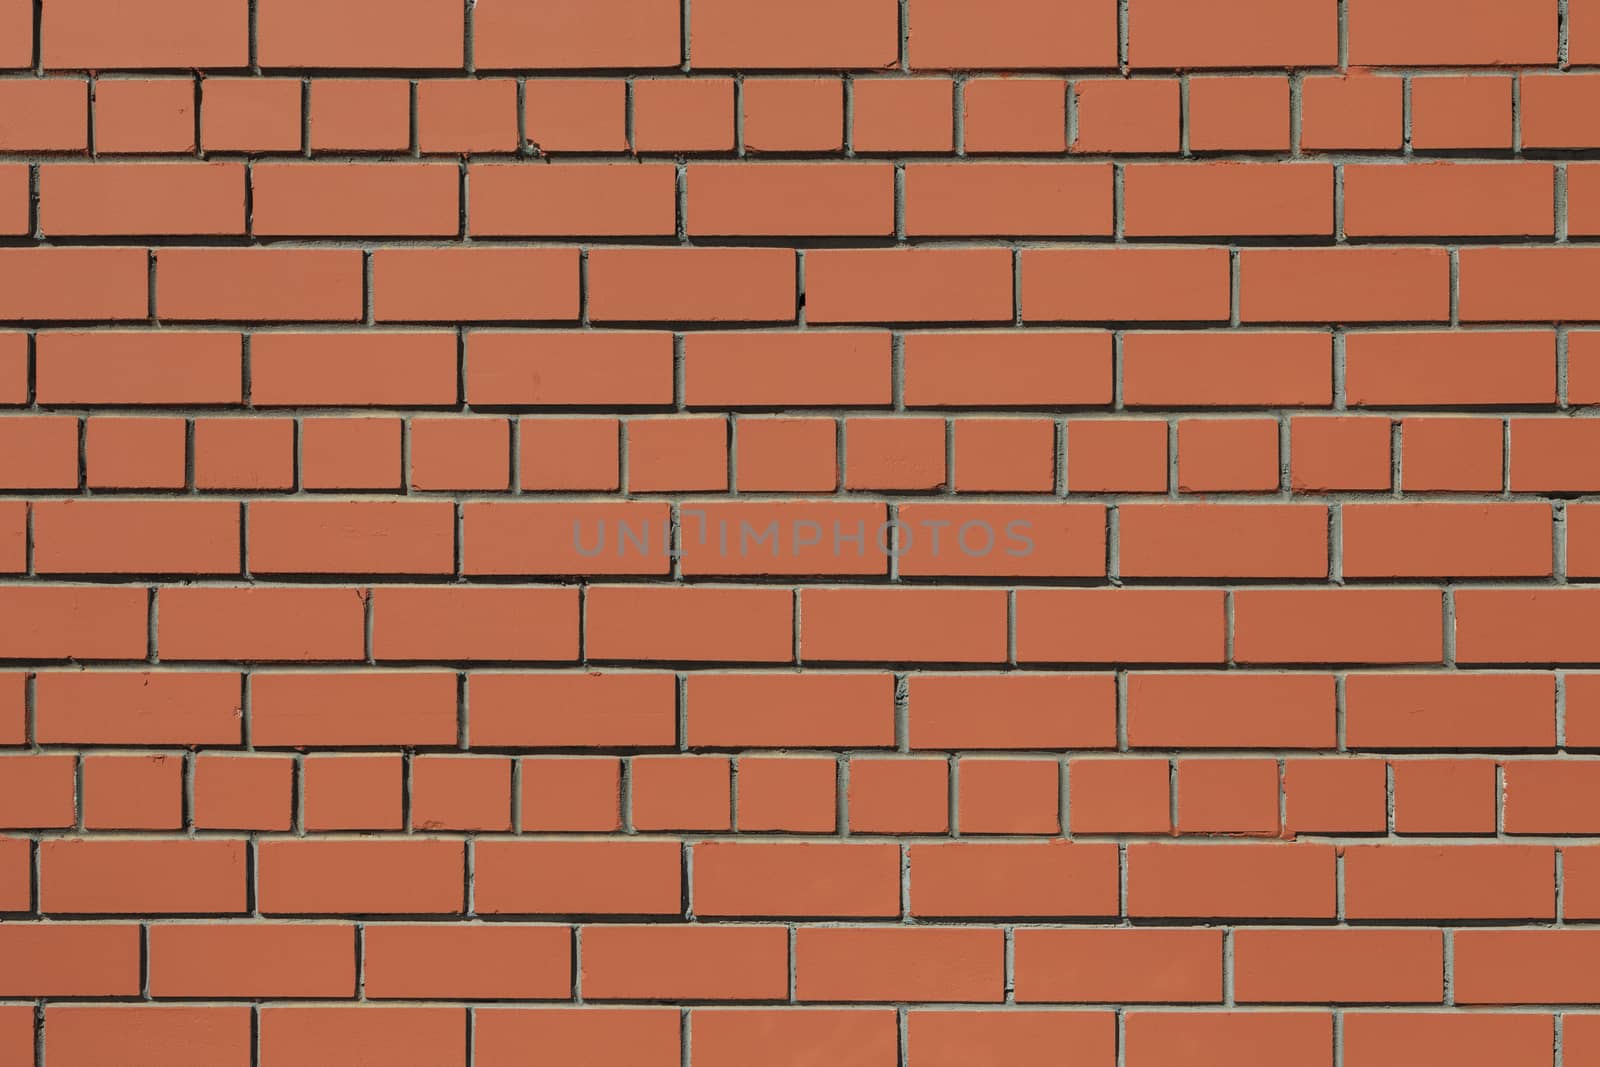 Front full-size view of a flat brown brick wall